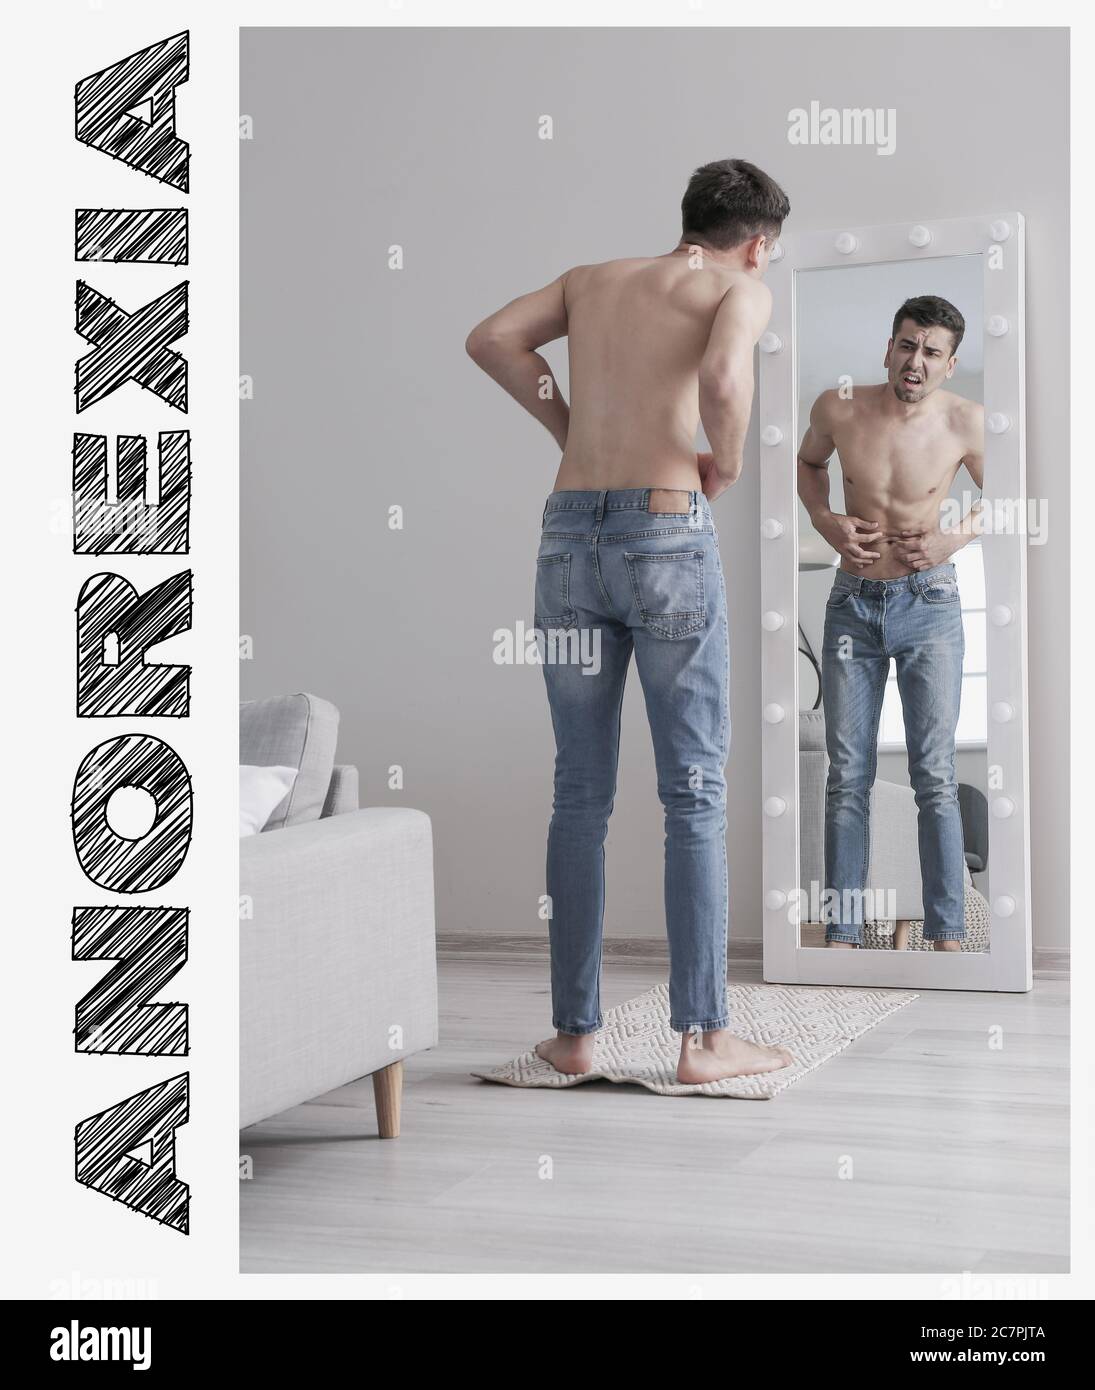 Young man with anorexia looking at his reflection in mirror Stock Photo